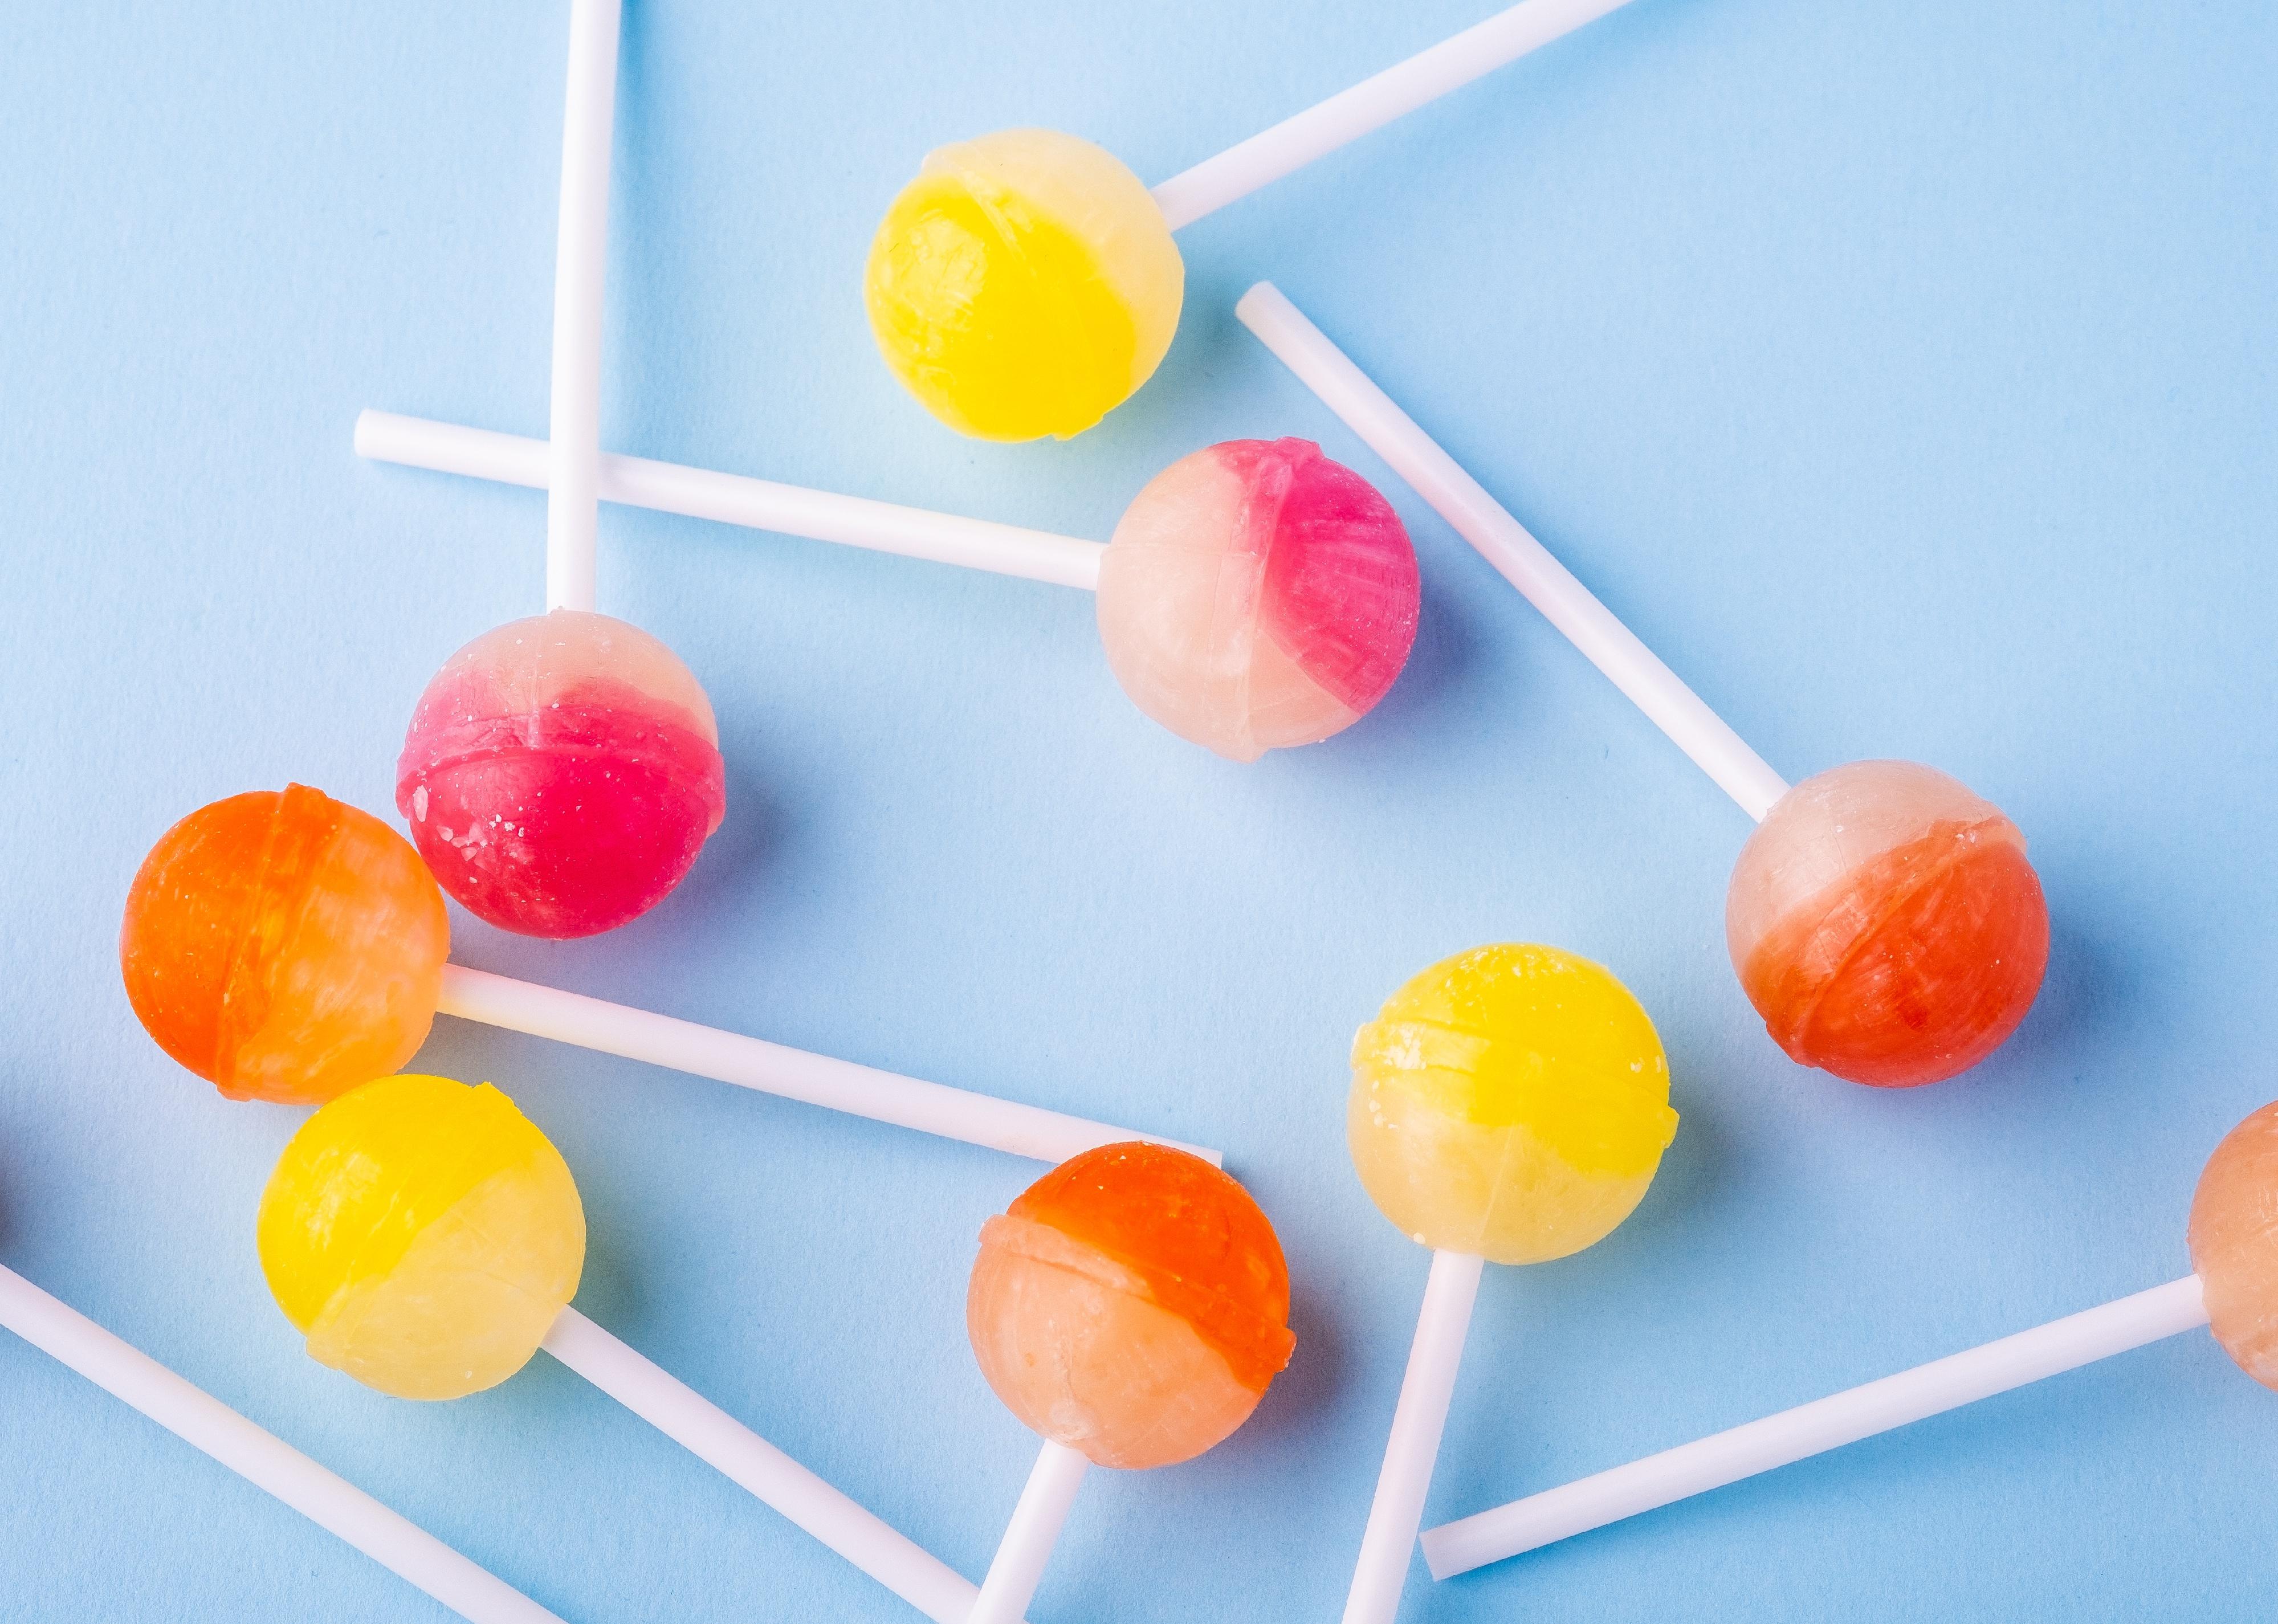 <p>"Lollipop" is the Northeastern term of choice for candy on a stick, while Southerners and Midwesterners are more partial to "<a href="https://www.insider.com/words-that-are-different-across-the-us#a-favorite-candy-treat-on-a-stick-can-either-be-called-a-sucker-or-a-lollipop-3">sucker</a>." The former is thought to have begun as a Northern English slang term for "<a href="https://www.mashed.com/418108/the-surprising-place-the-name-lollipop-actually-came-from/">tongue slap</a>," invented by Brits selling the candy on the streets.</p>